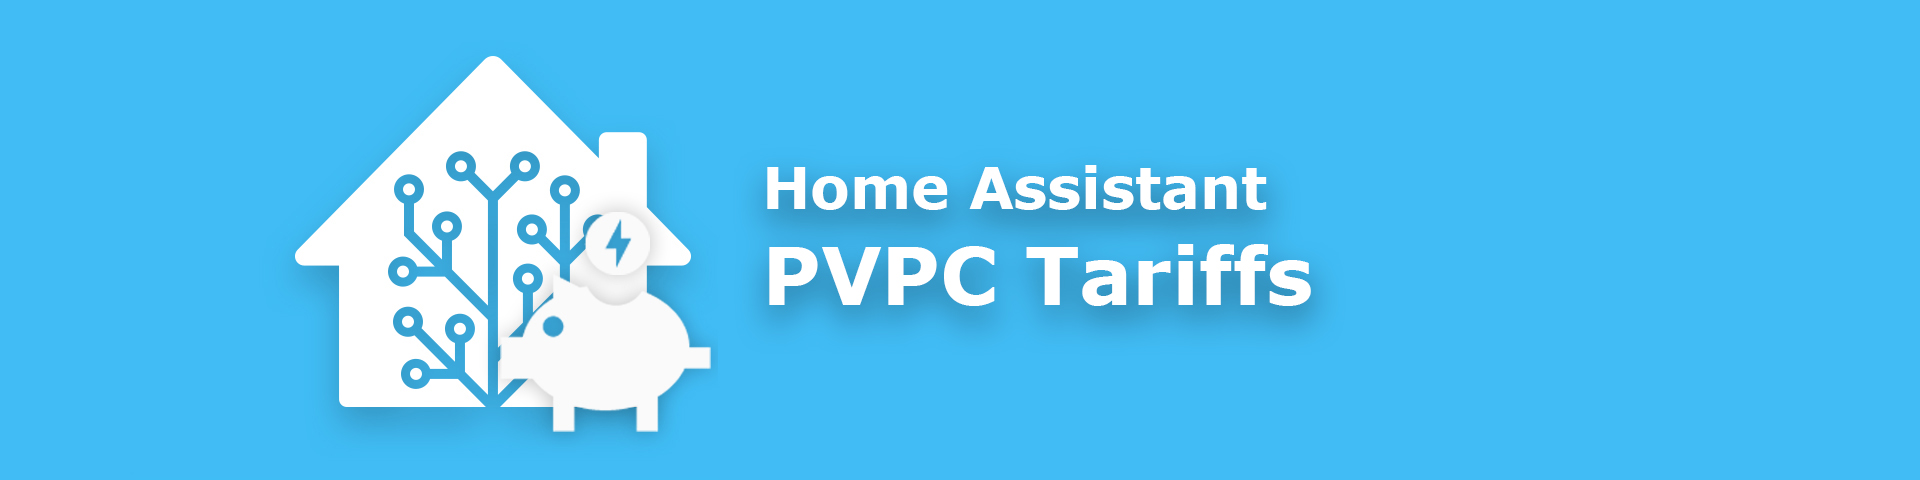 PVPC tariff prices in Home Assistant